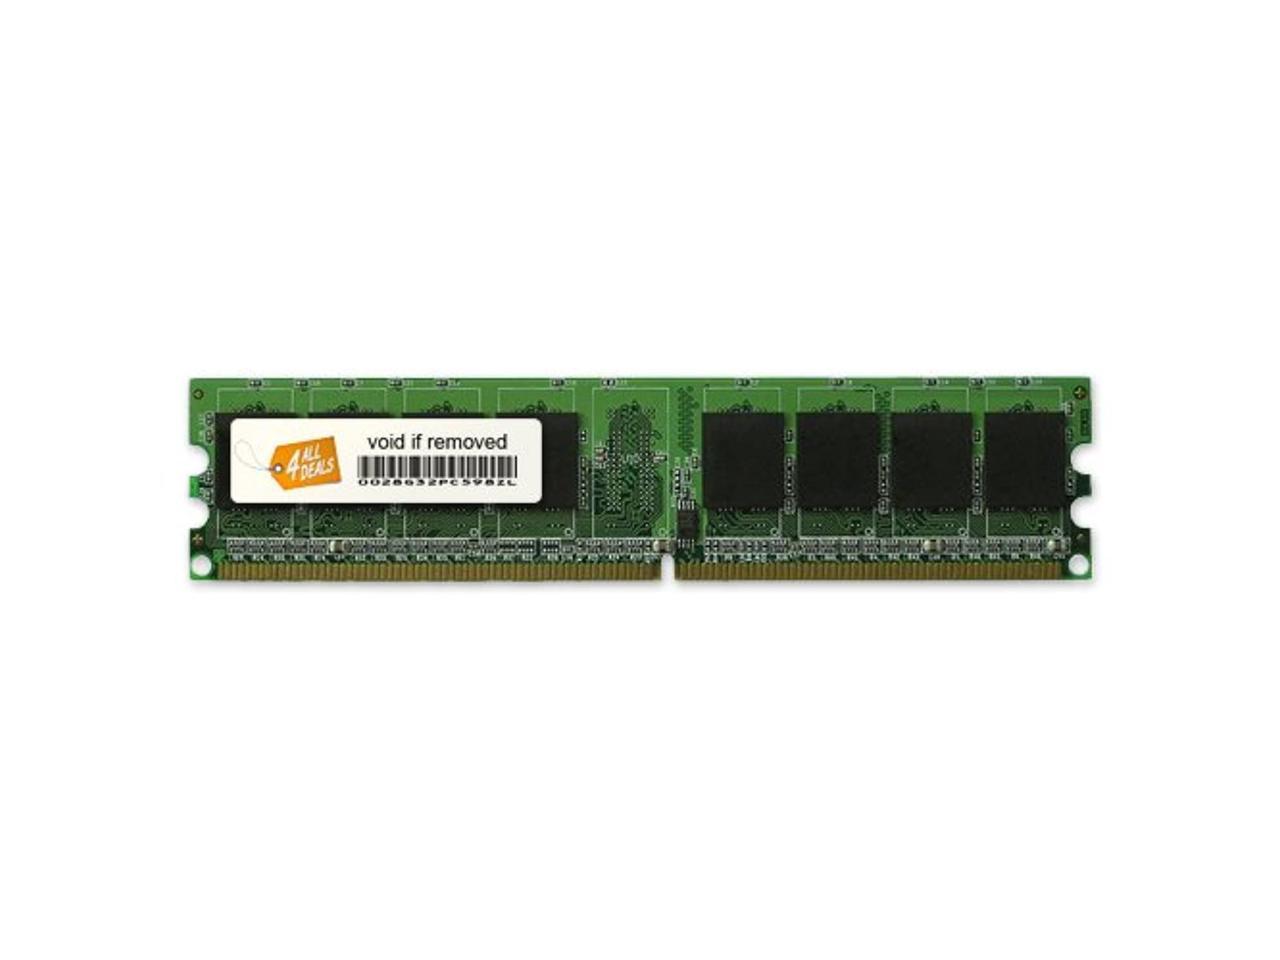 4AllDeals 4GB Kit Memory RAM Upgrade for Dell Precision 490 DDR2-533MHz 240-pin DIMM 2x2GB 